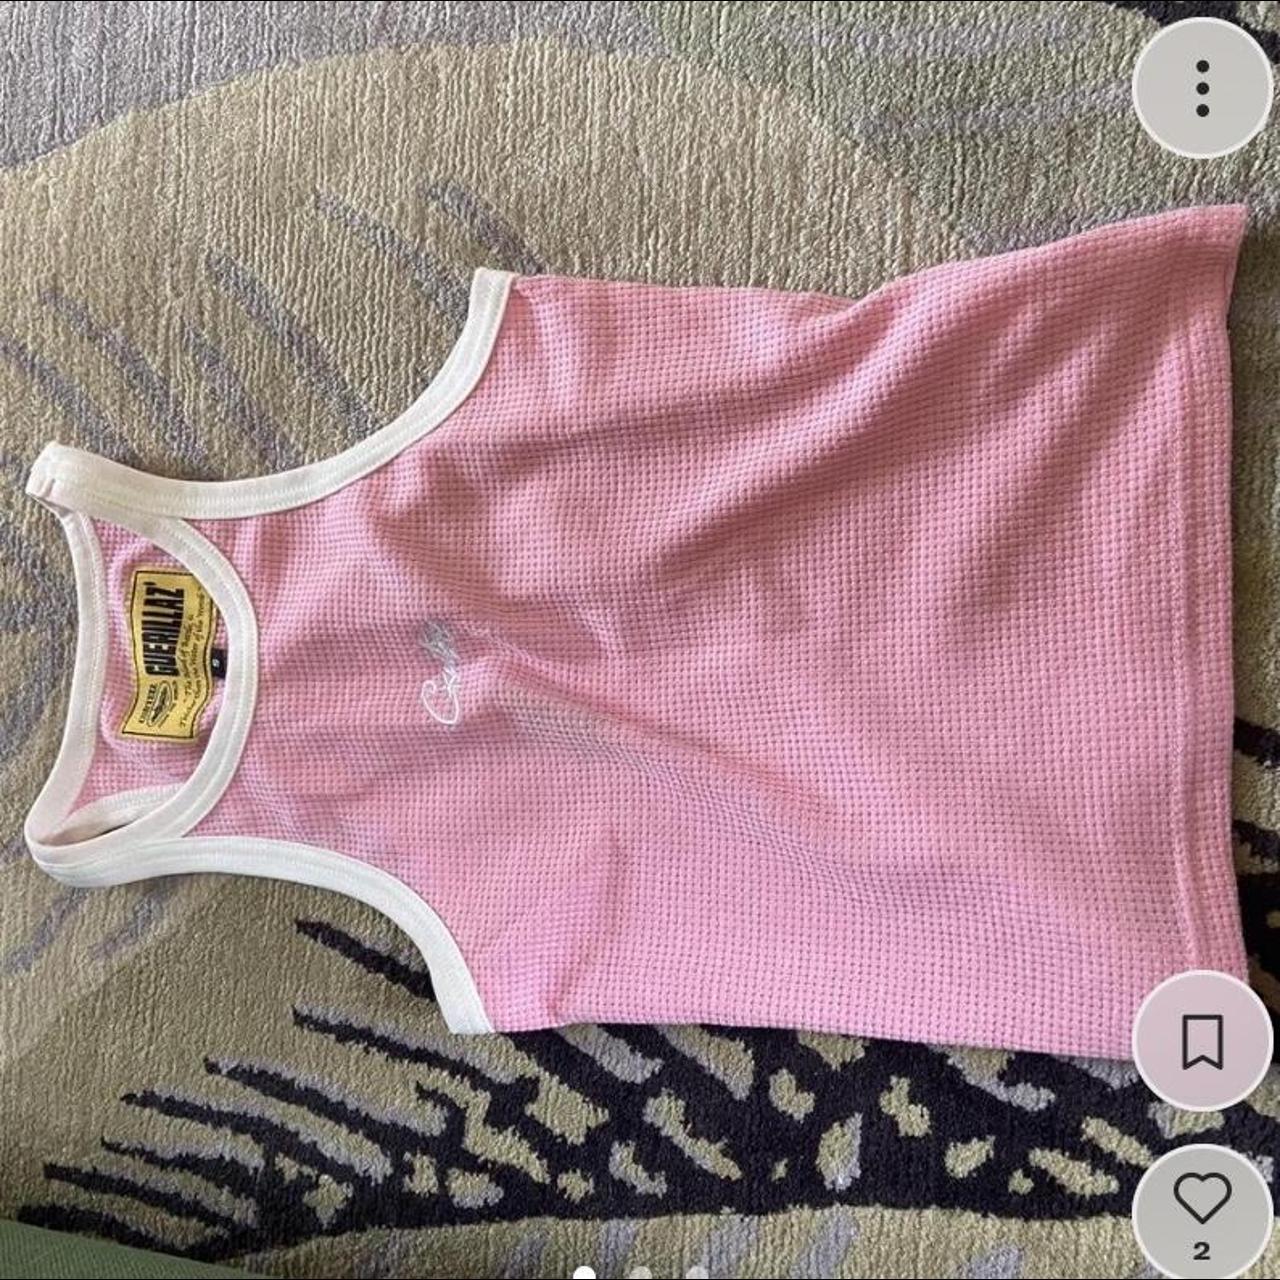 Pink cortiez tank top Worn like once but has a tiny... - Depop